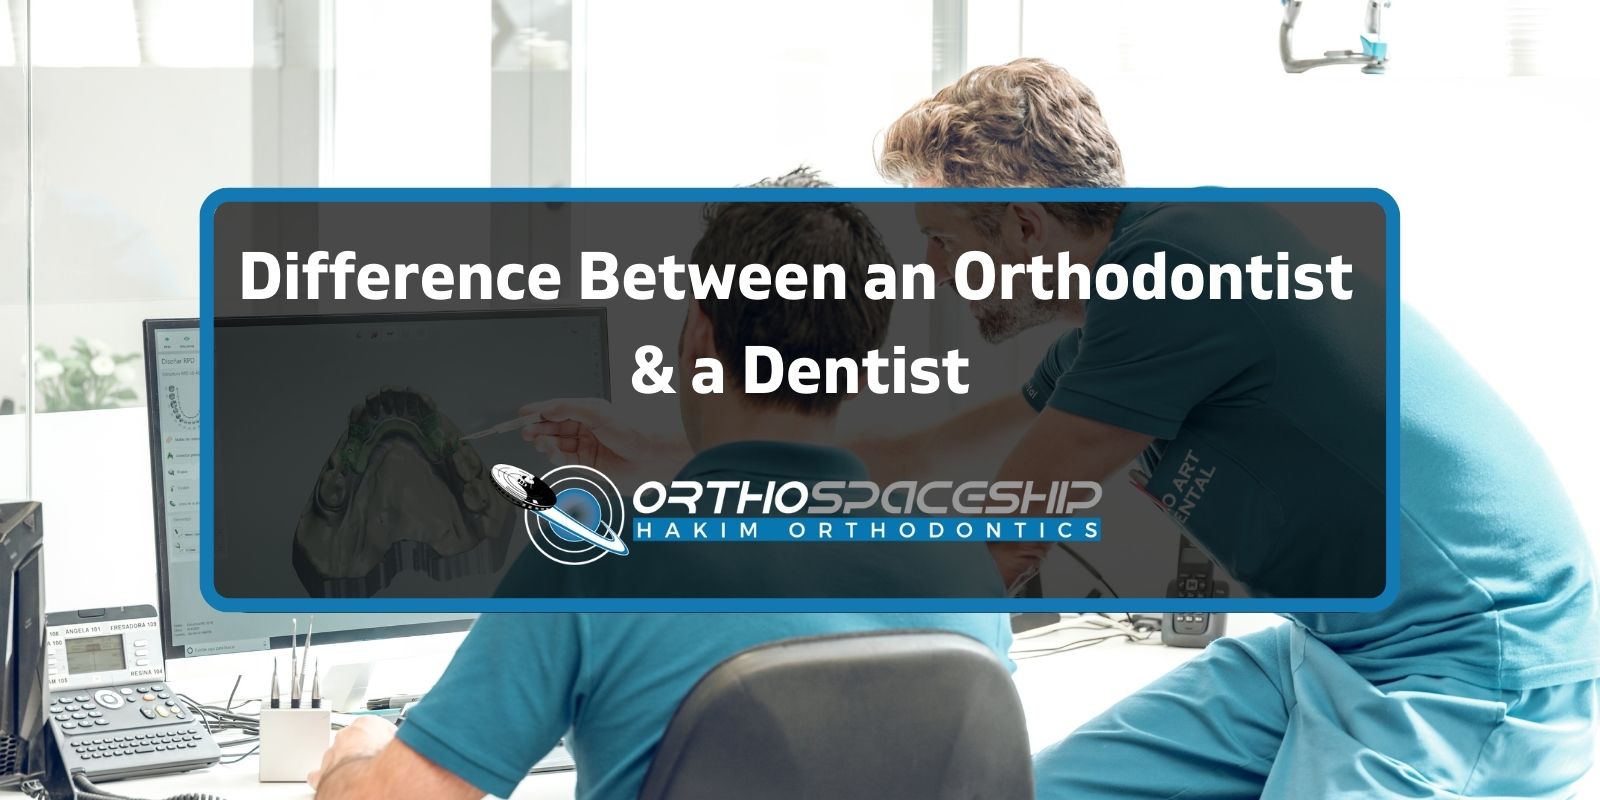 What's the difference between an orthodontist and a dentist?